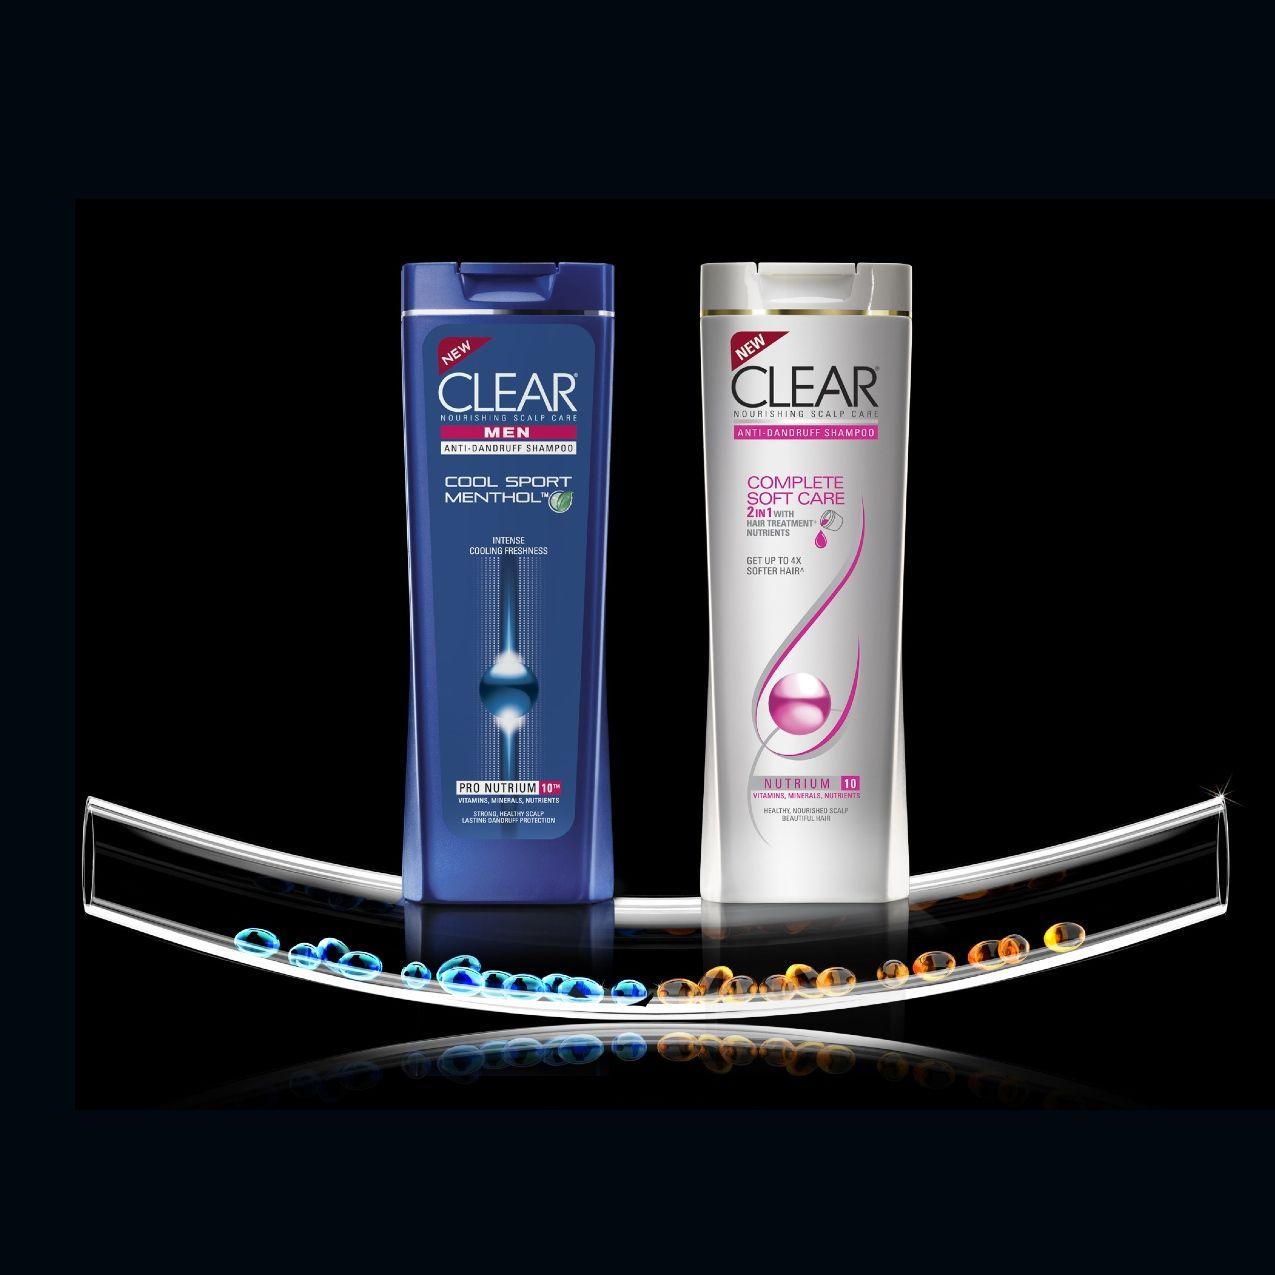 Clear Men Logo - CLEAR will make you Flip Your Hair!